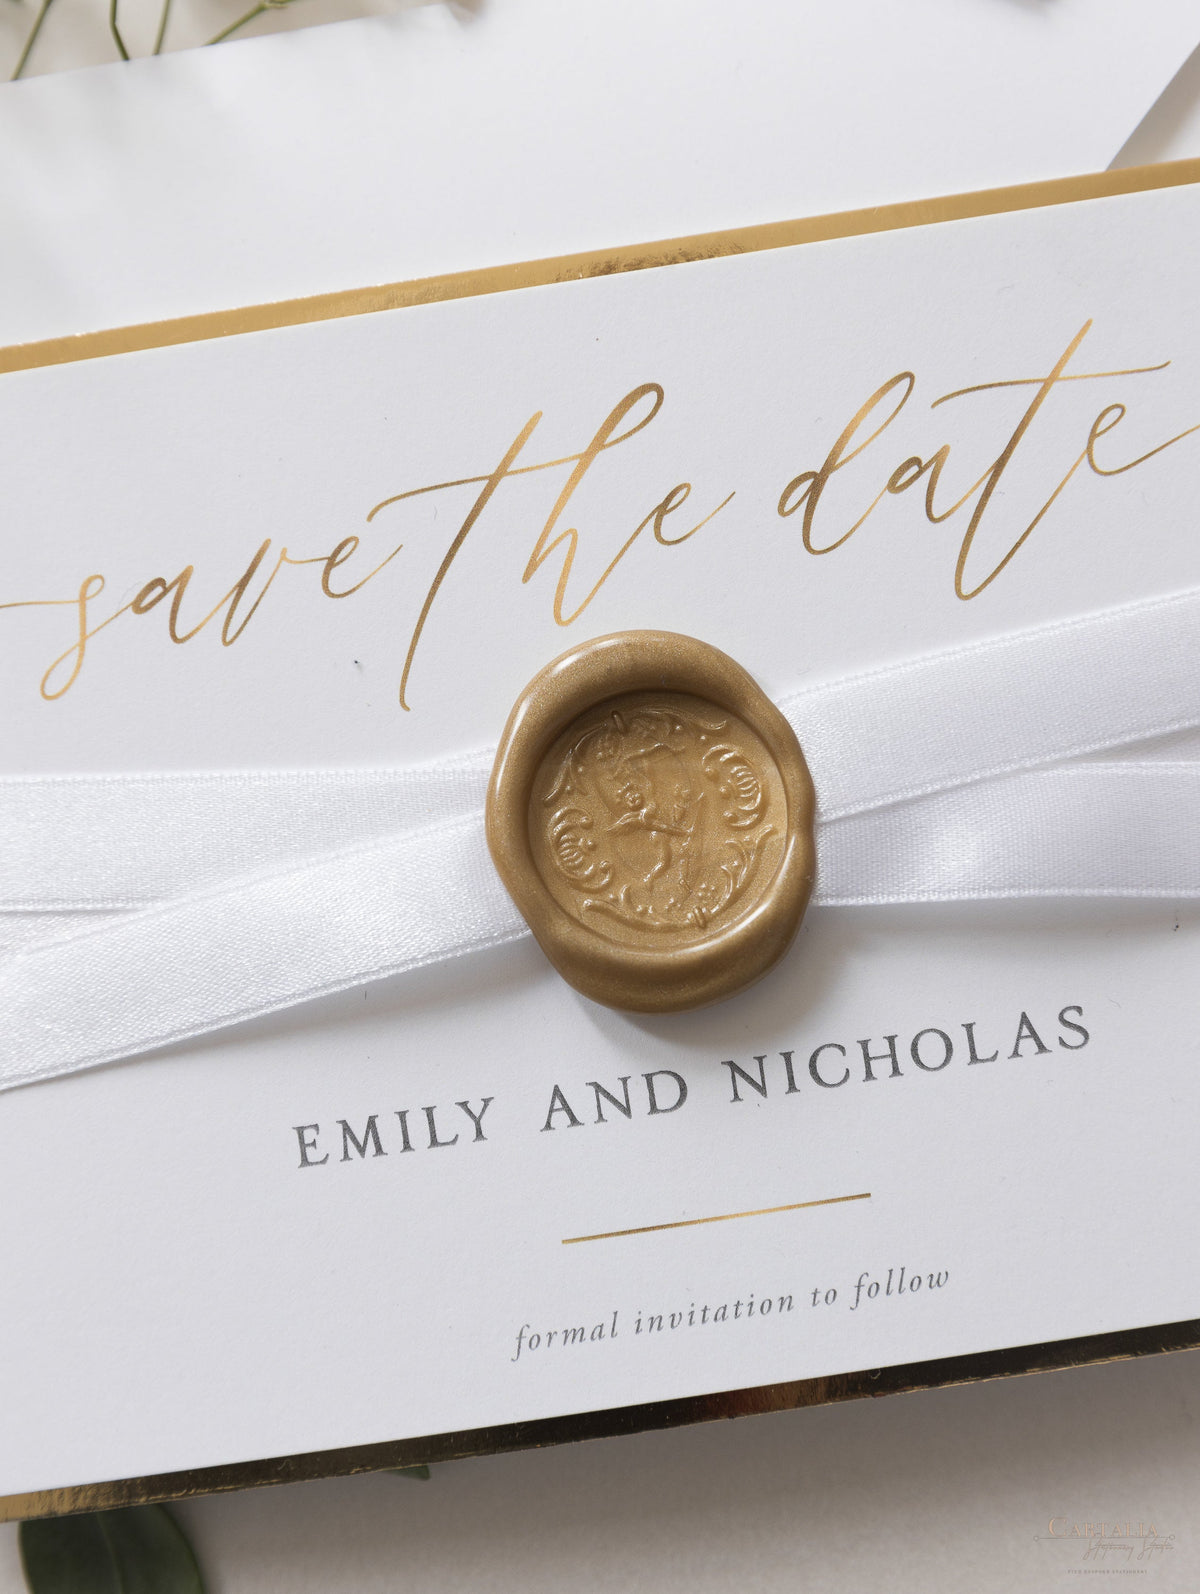 Luxury Wax Seal Save the Date Cupid's Bow Gold Foil Trim and Satin Ribbon